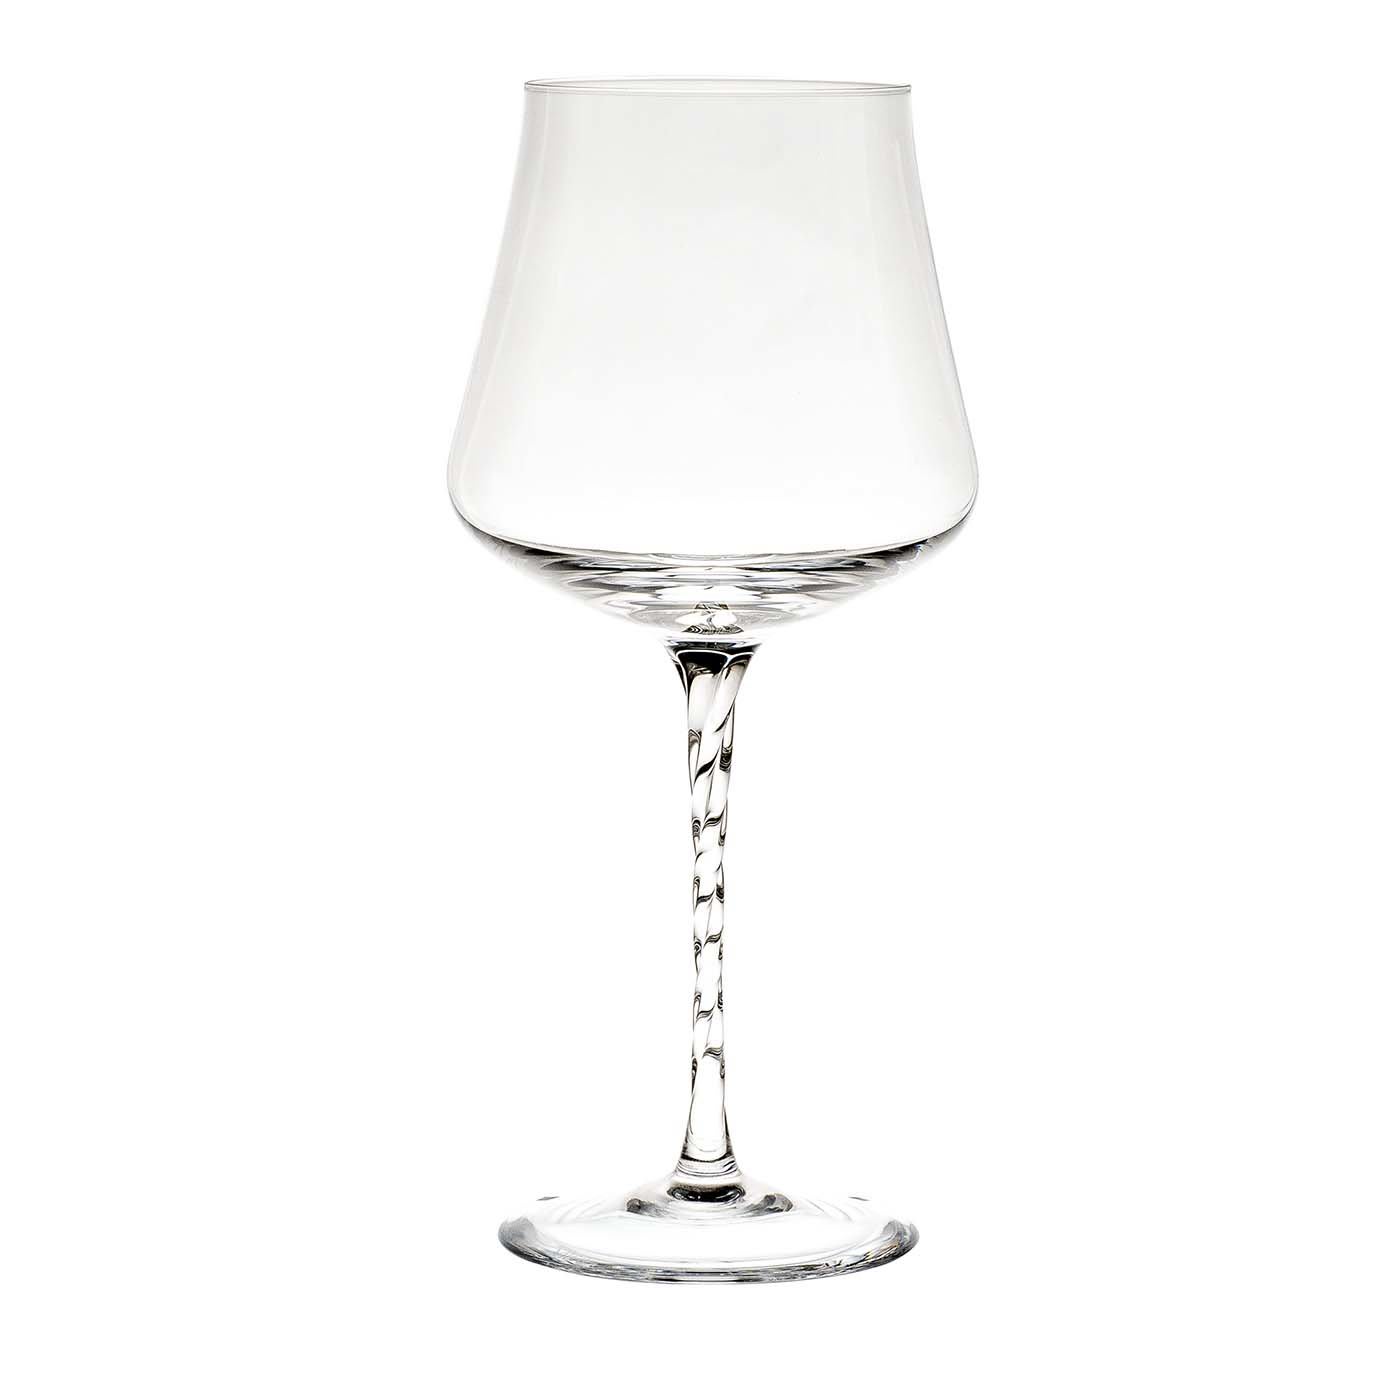 Beviamo Set of 6 Water Glasses with Twisted Stem - Cristalleria ColleVilca